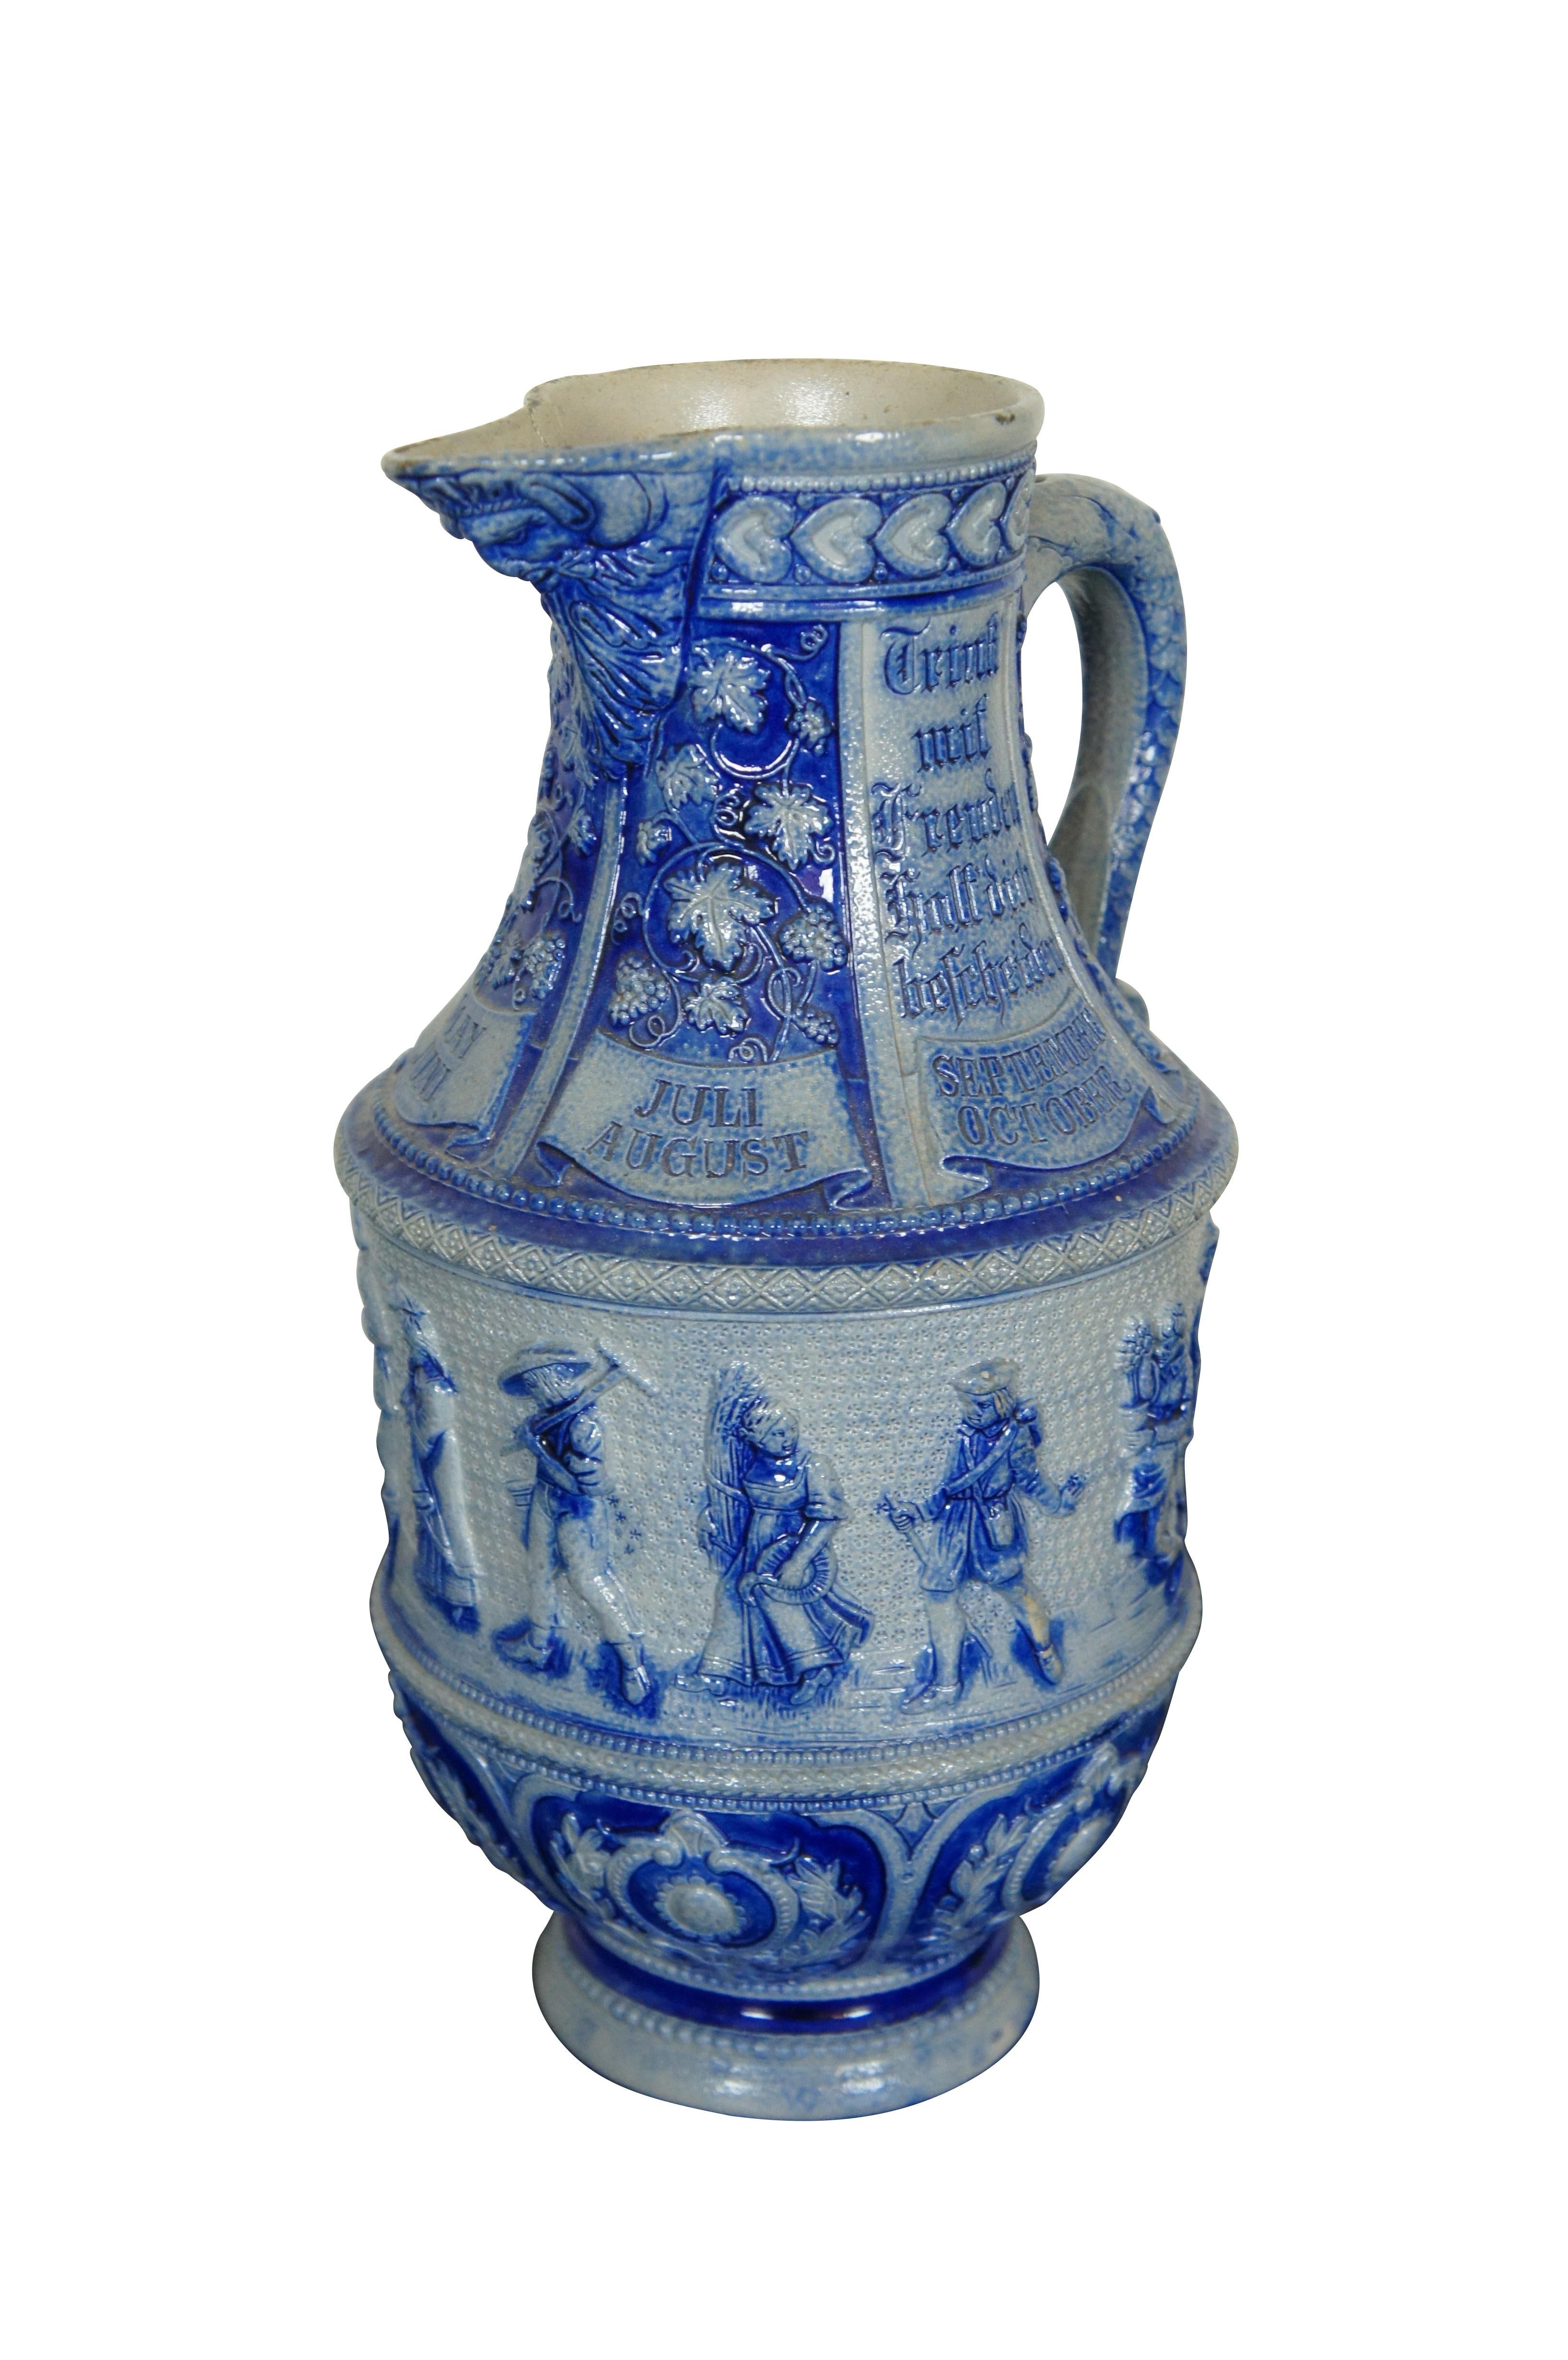 Antique German cobalt blue salt glaze stoneware pitcher / jug / ewer featuring the face of Dionysus or Bacchus - God of wine - on the spout surrounded by grapevines / grapes / leaves and the months of the year.  The handle has serpent scales and the